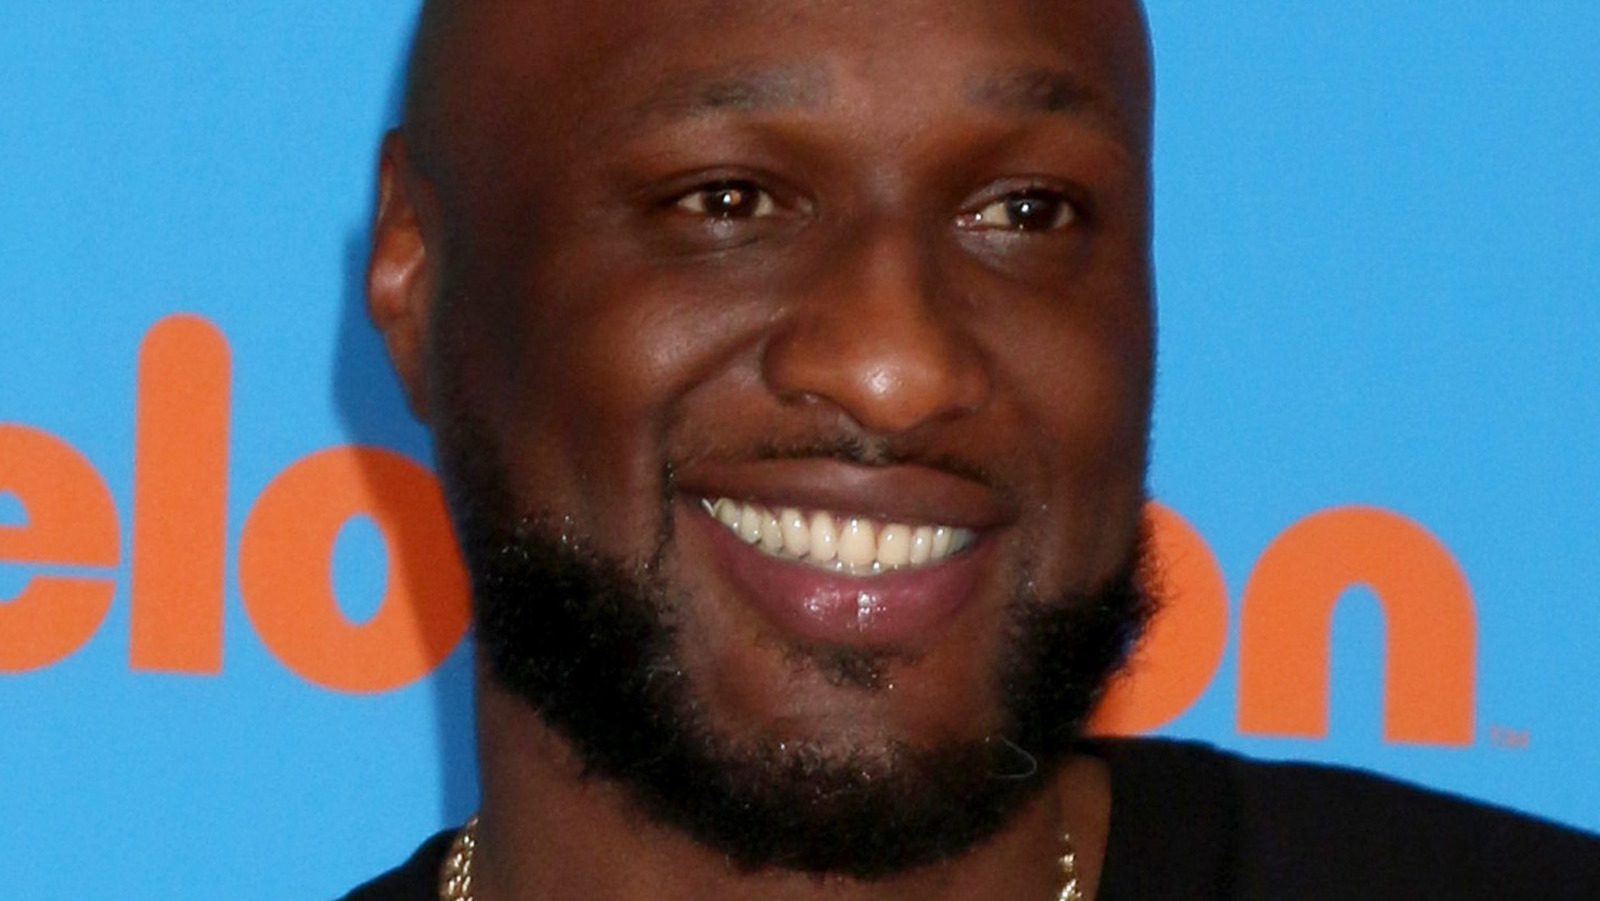 The Truth About The Time Lamar Odom Went Missing